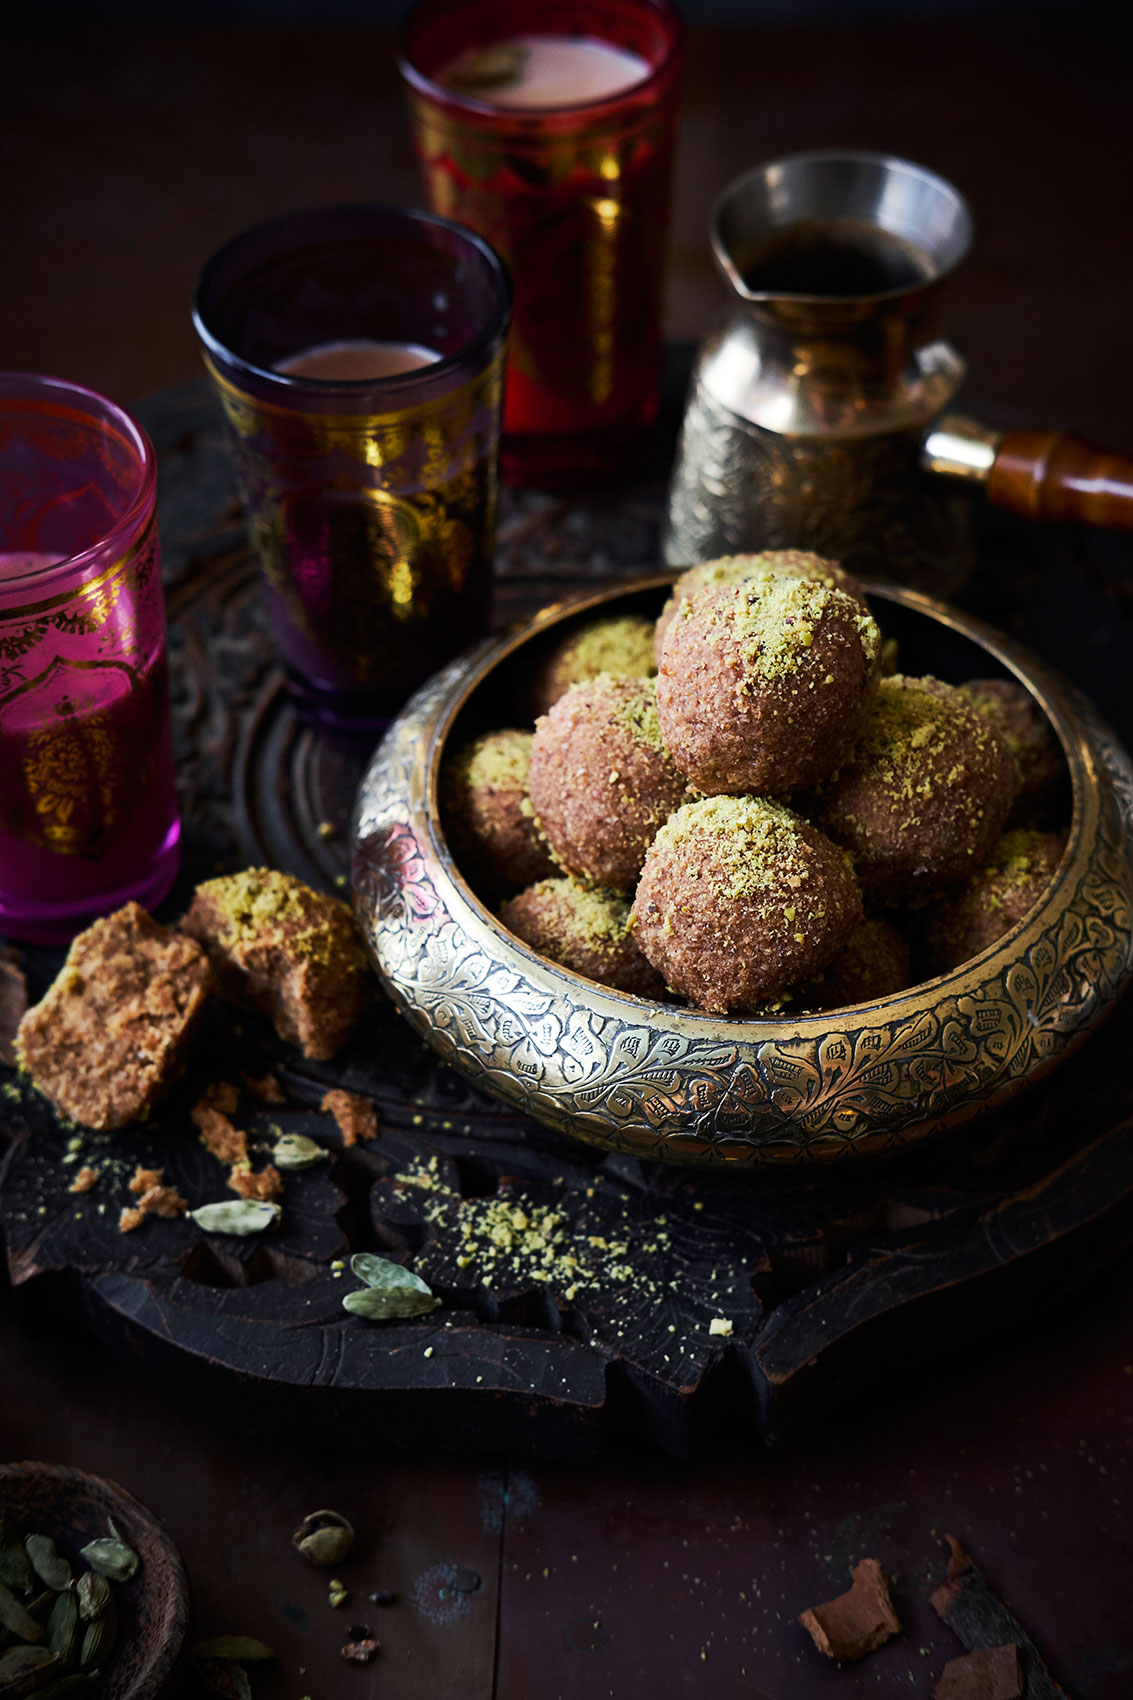 My Indian Kitchen • Indian Almond Pistachio Ladoo • Advertising & Editorial Food Photography